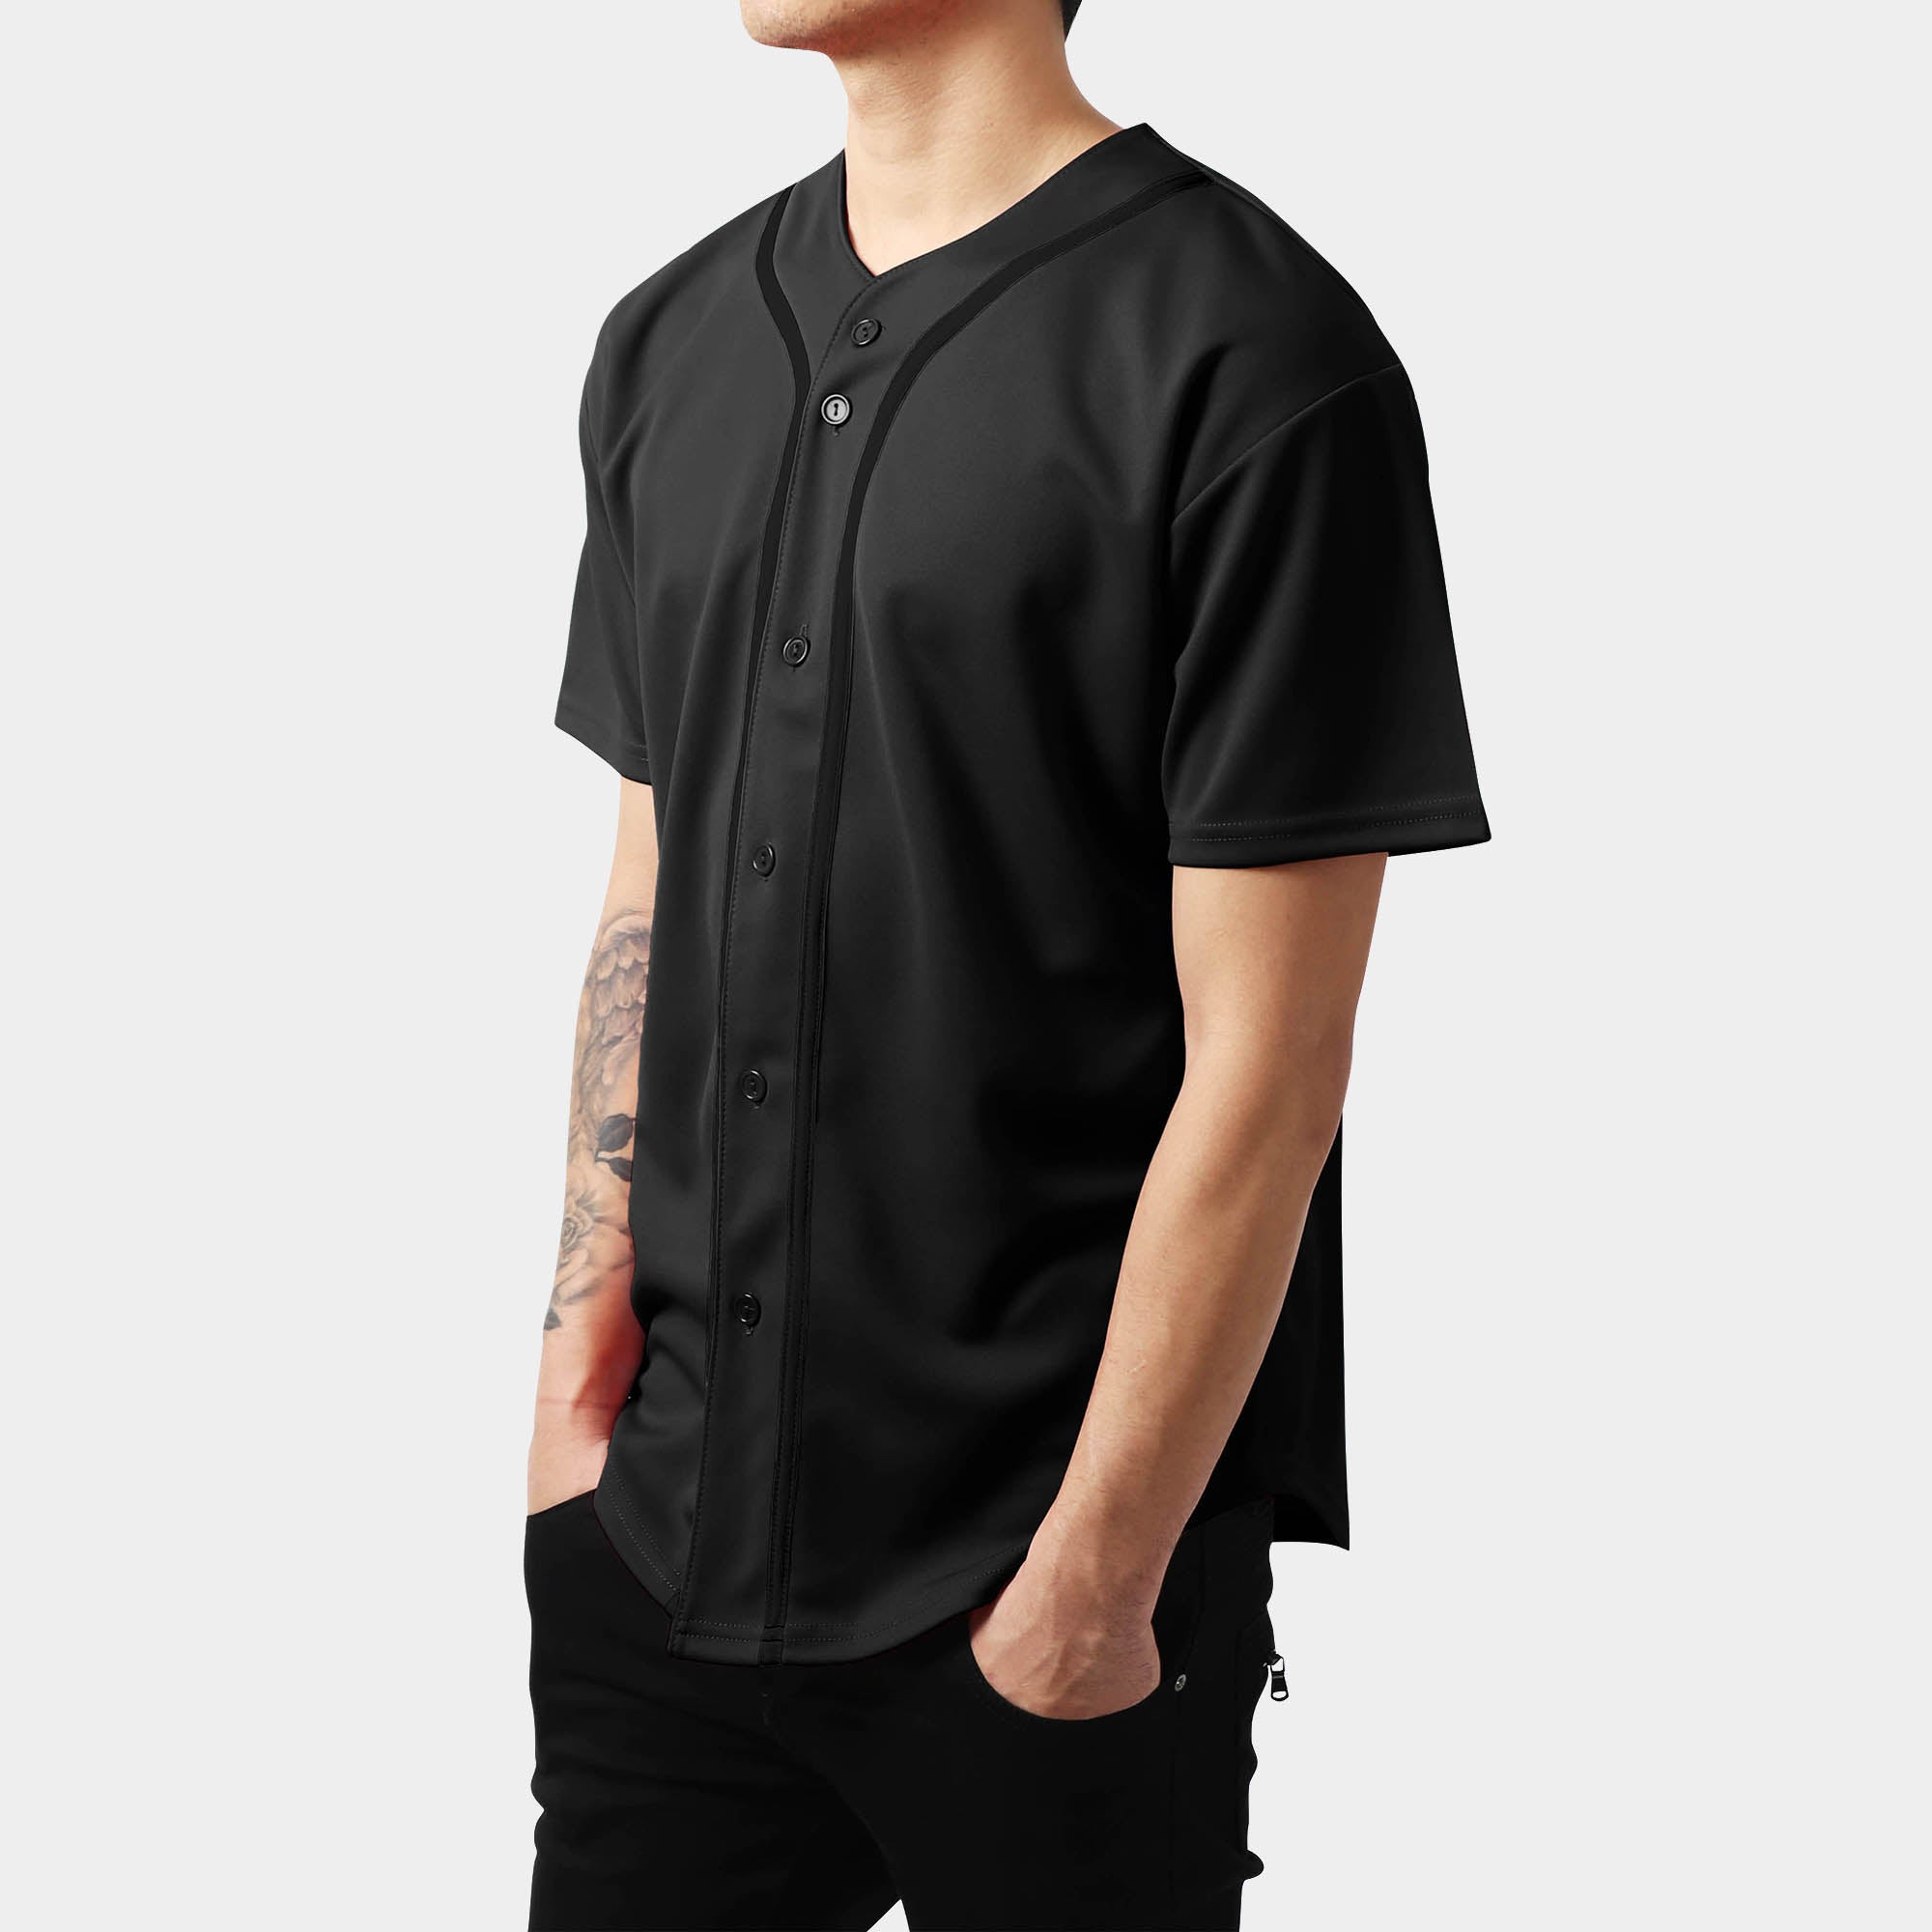 OUTFIT / BLACK BASEBALL JERSEY - Get Up, Survive, Go Back To The